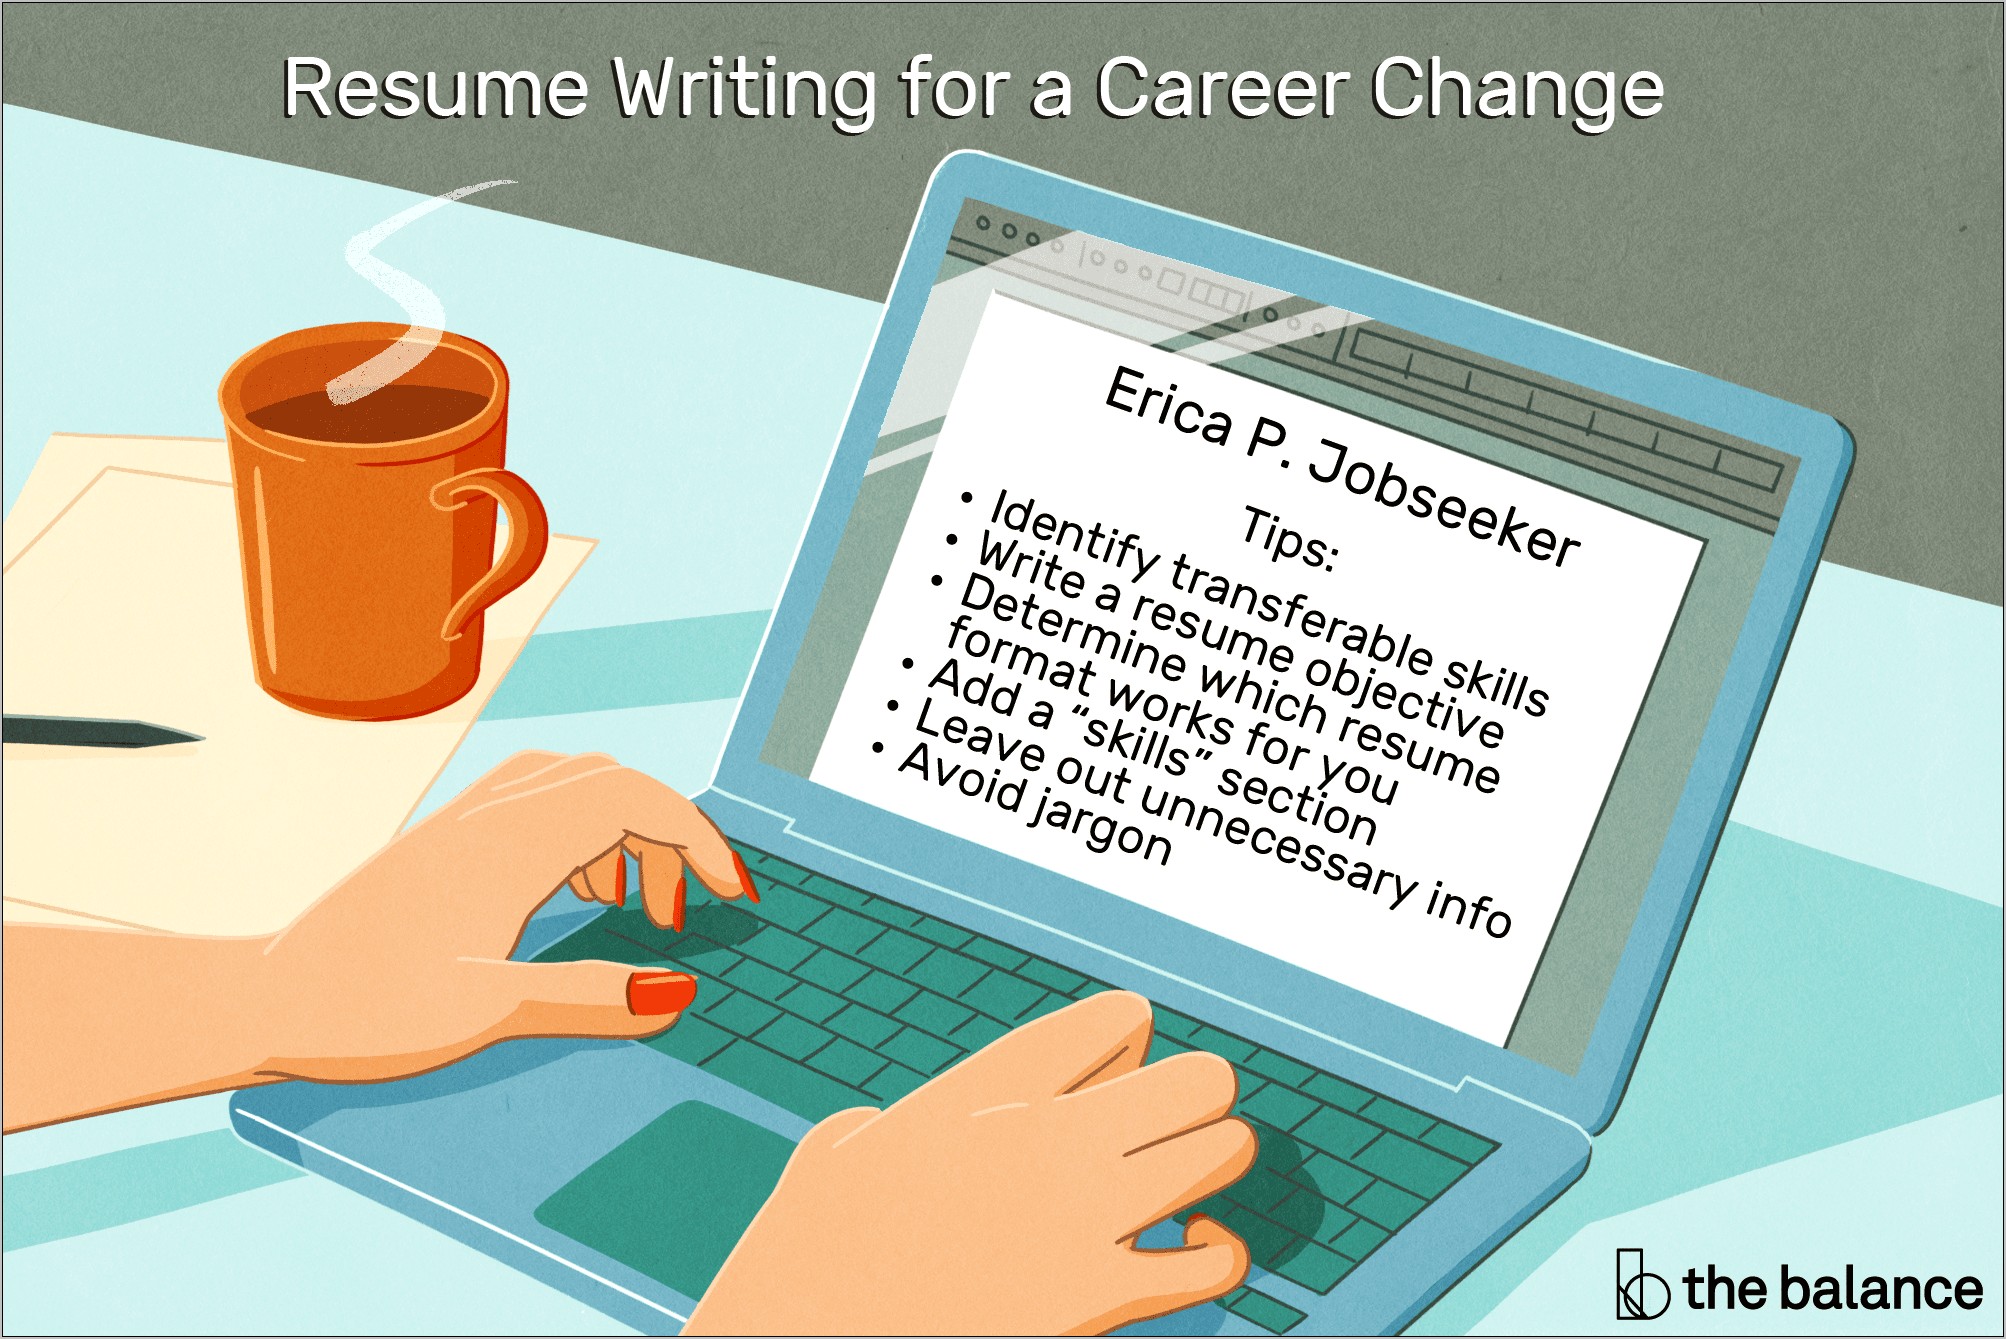 Resume Objective To Resume Your Career